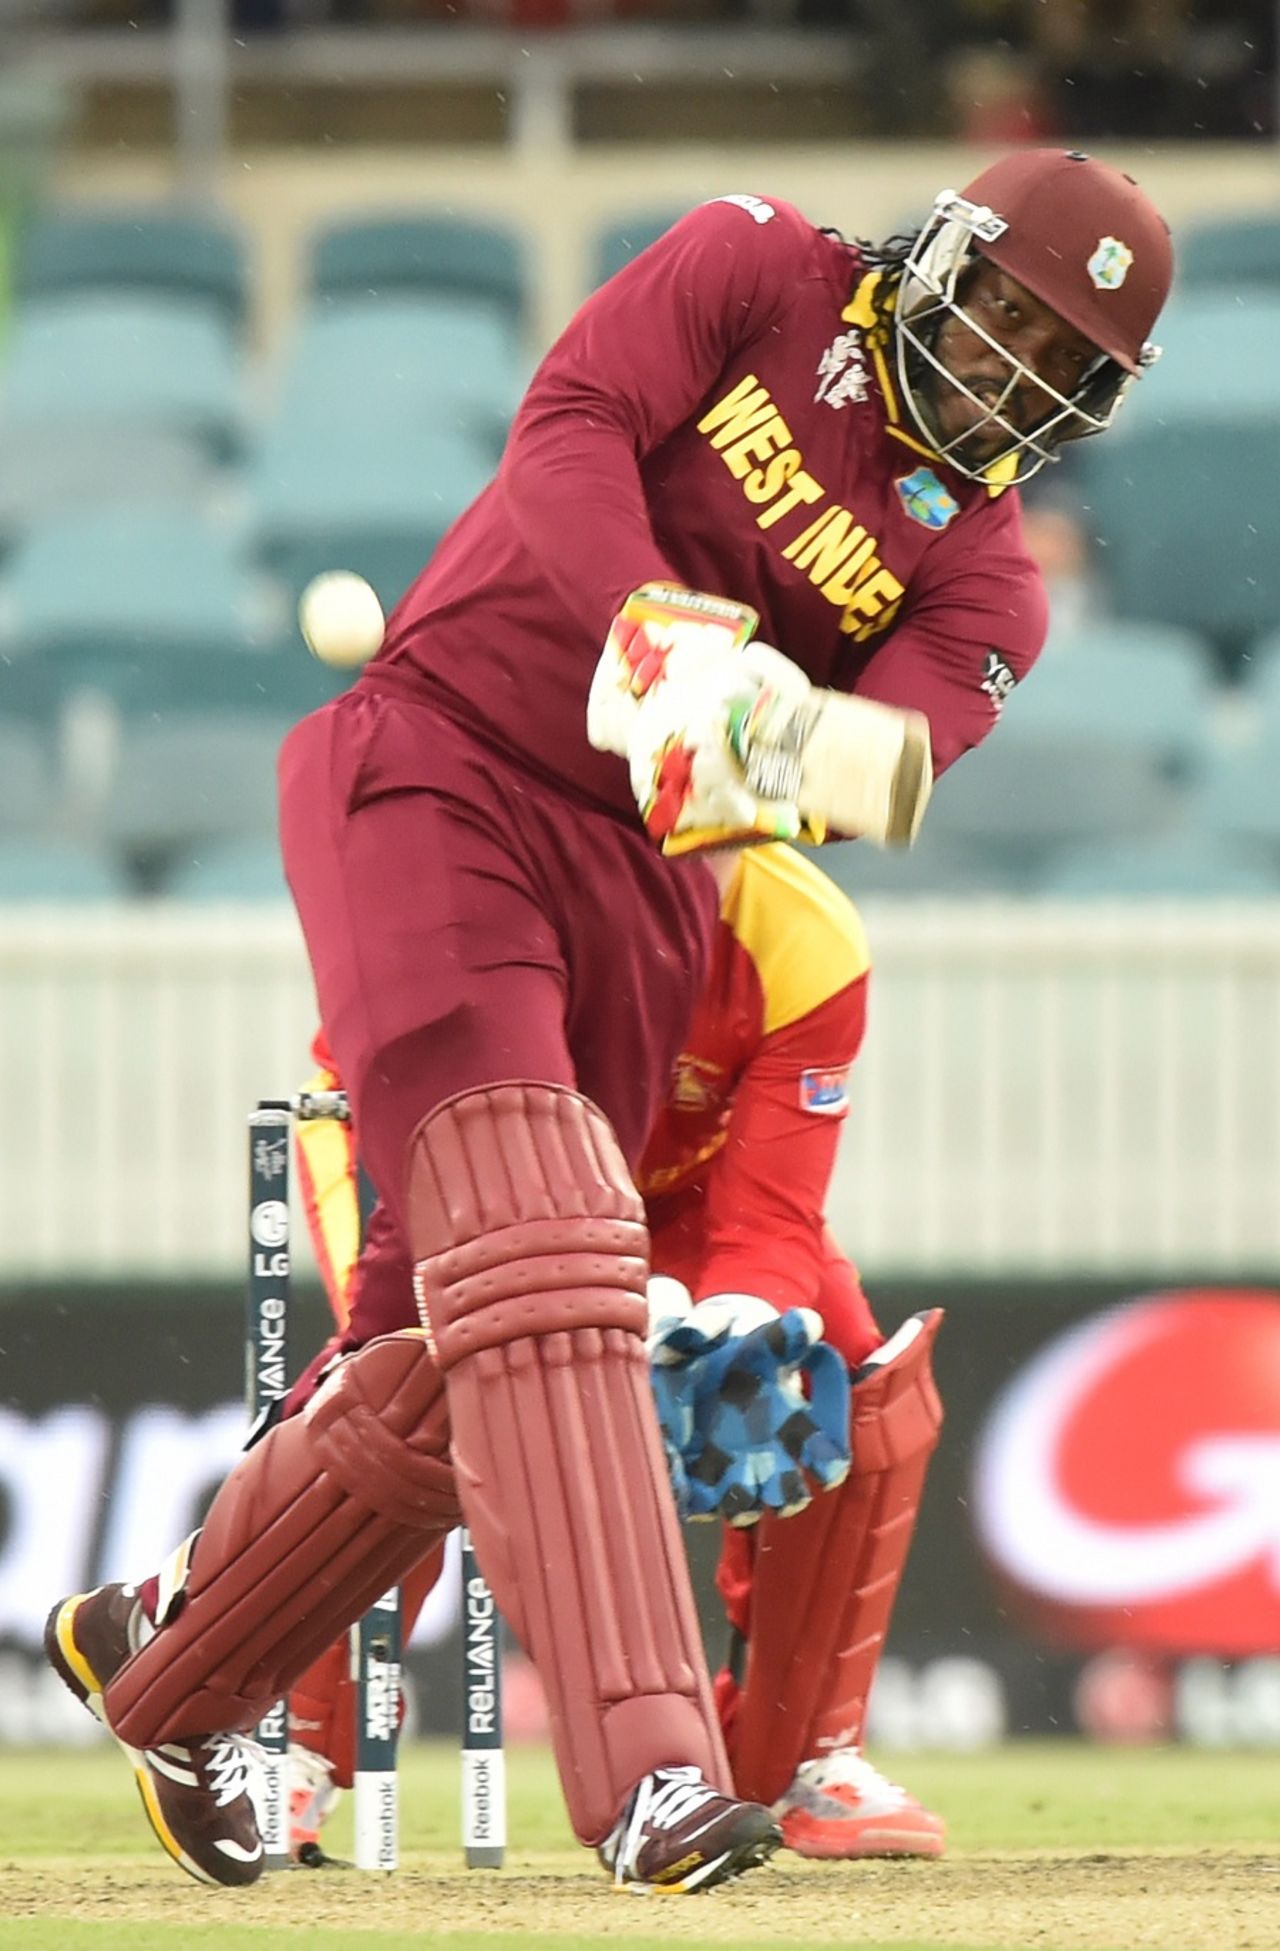 Chris Gayle hits out during his whirlwind knock, West Indies v Zimbabwe, World Cup 2015, Group B, Canberra, February 24, 2015